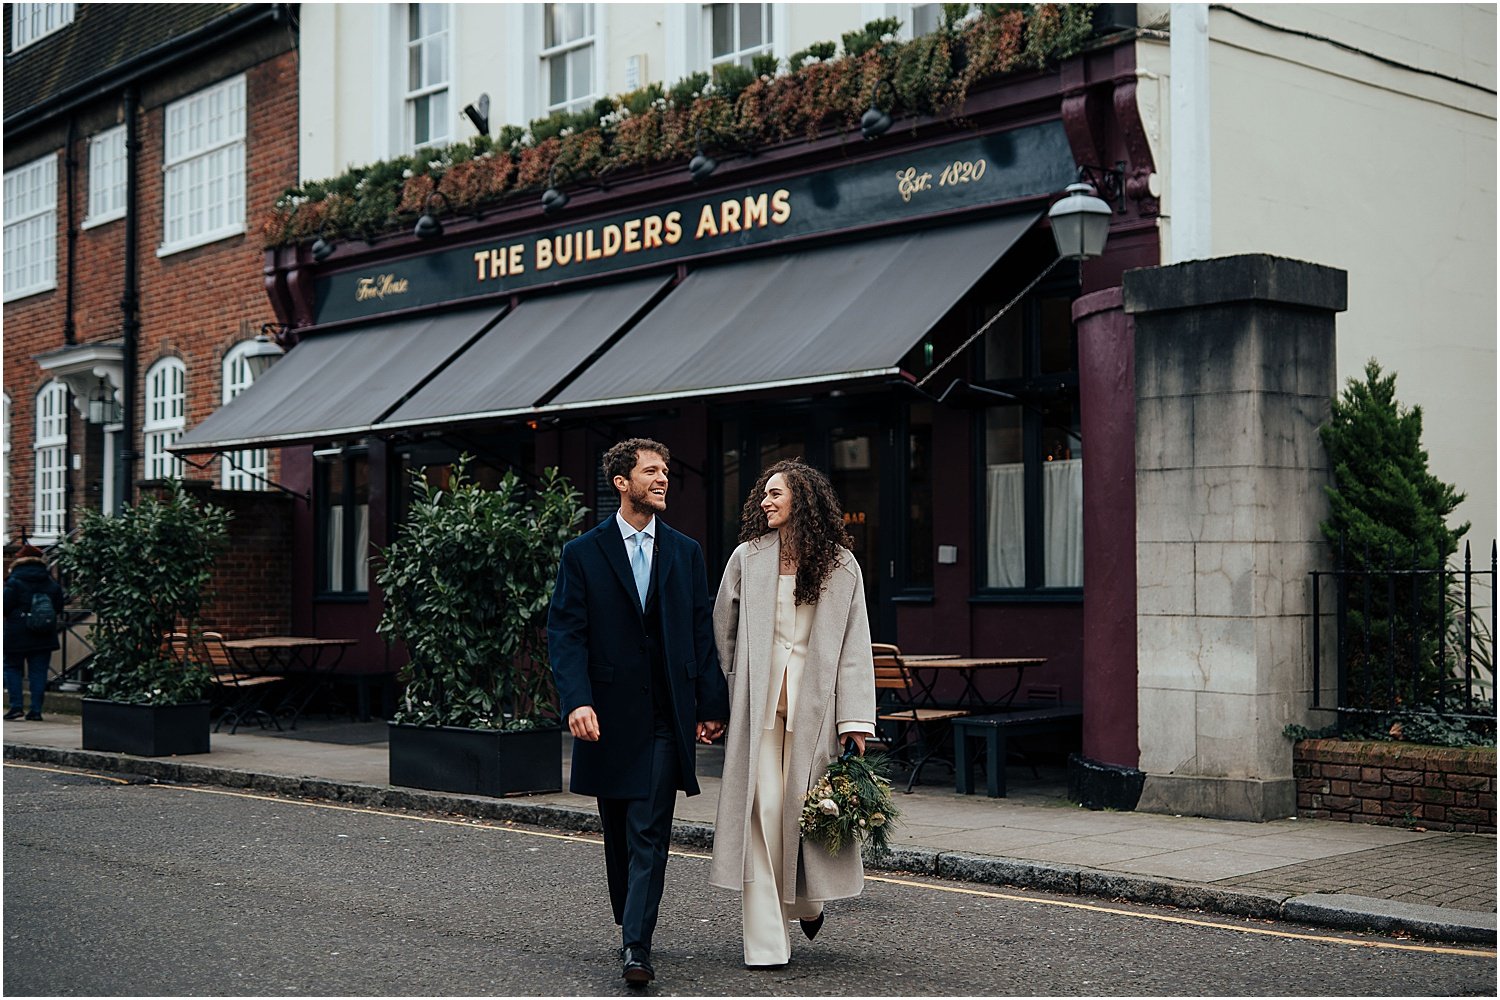 Bride and groom walking in front of pub